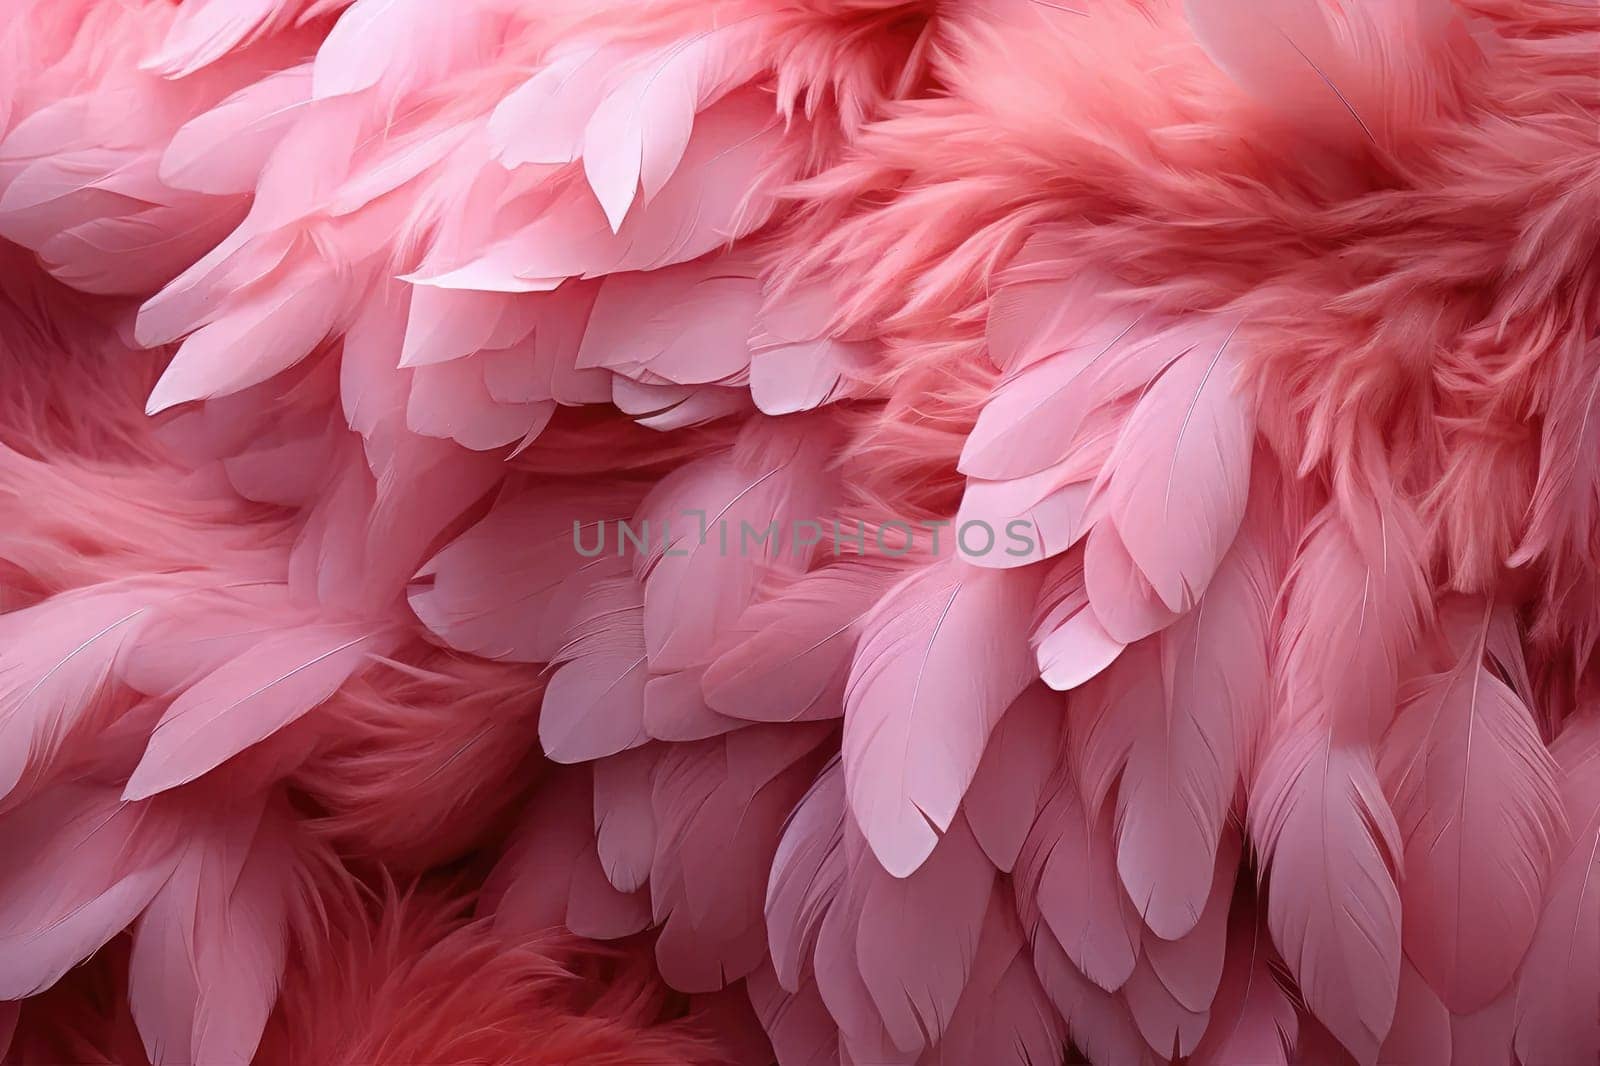 Luxurious pink bird feathers create amazing backdrops filled with tenderness and elegance.